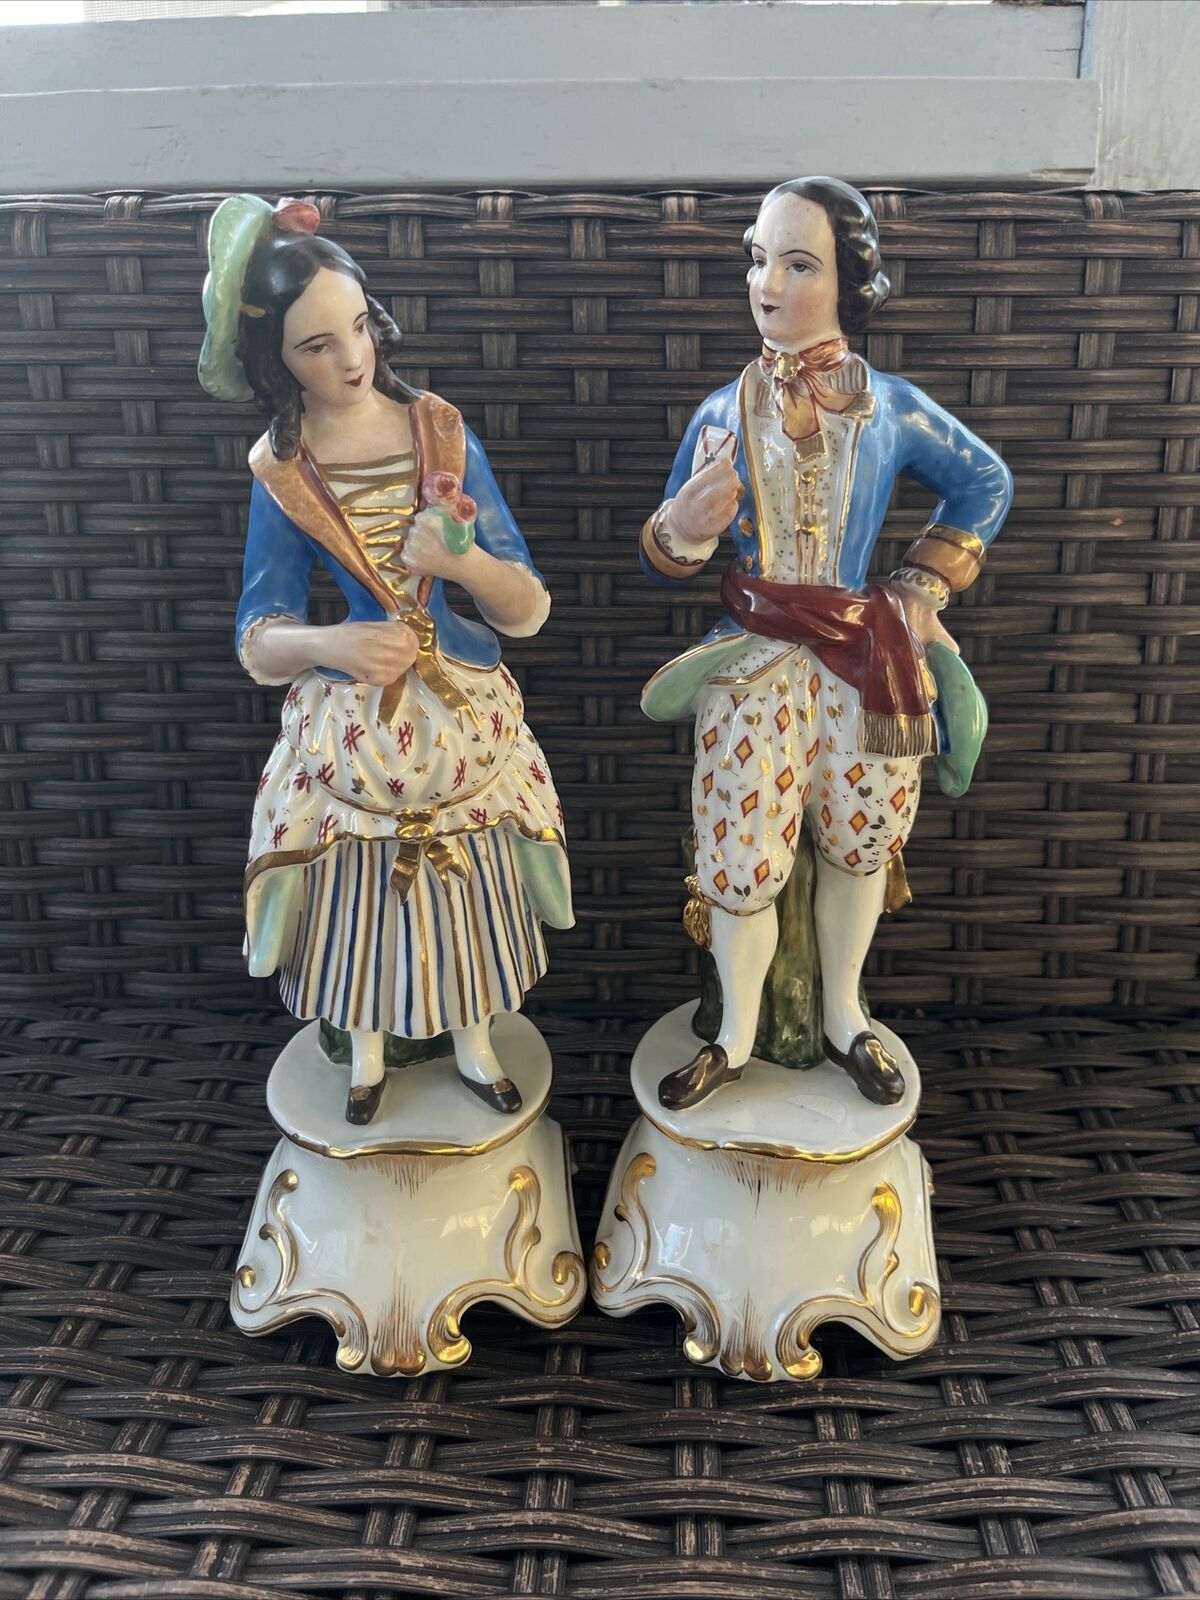 VICTORIAN FIGURINE COVENTRY PORCELAIN Victorian Couple Rare Numbered “28”